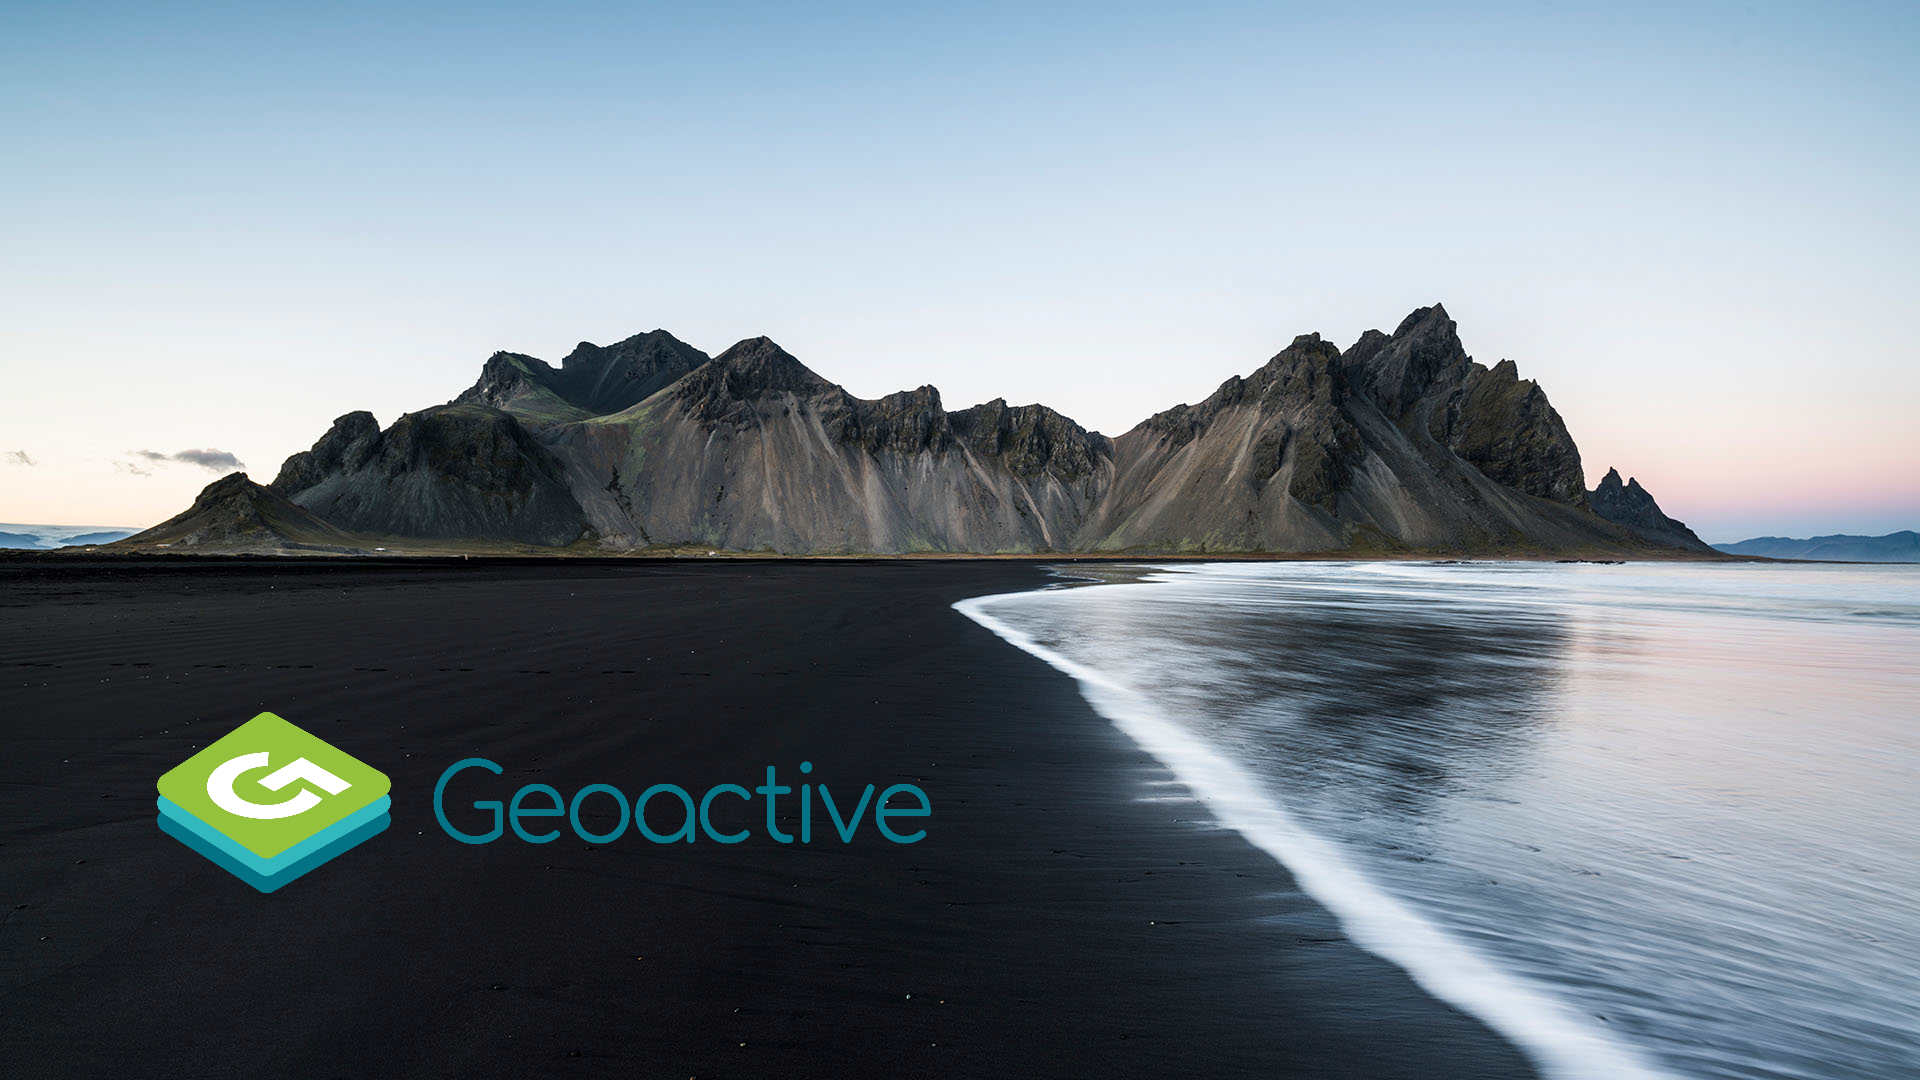 Who are Geoactive